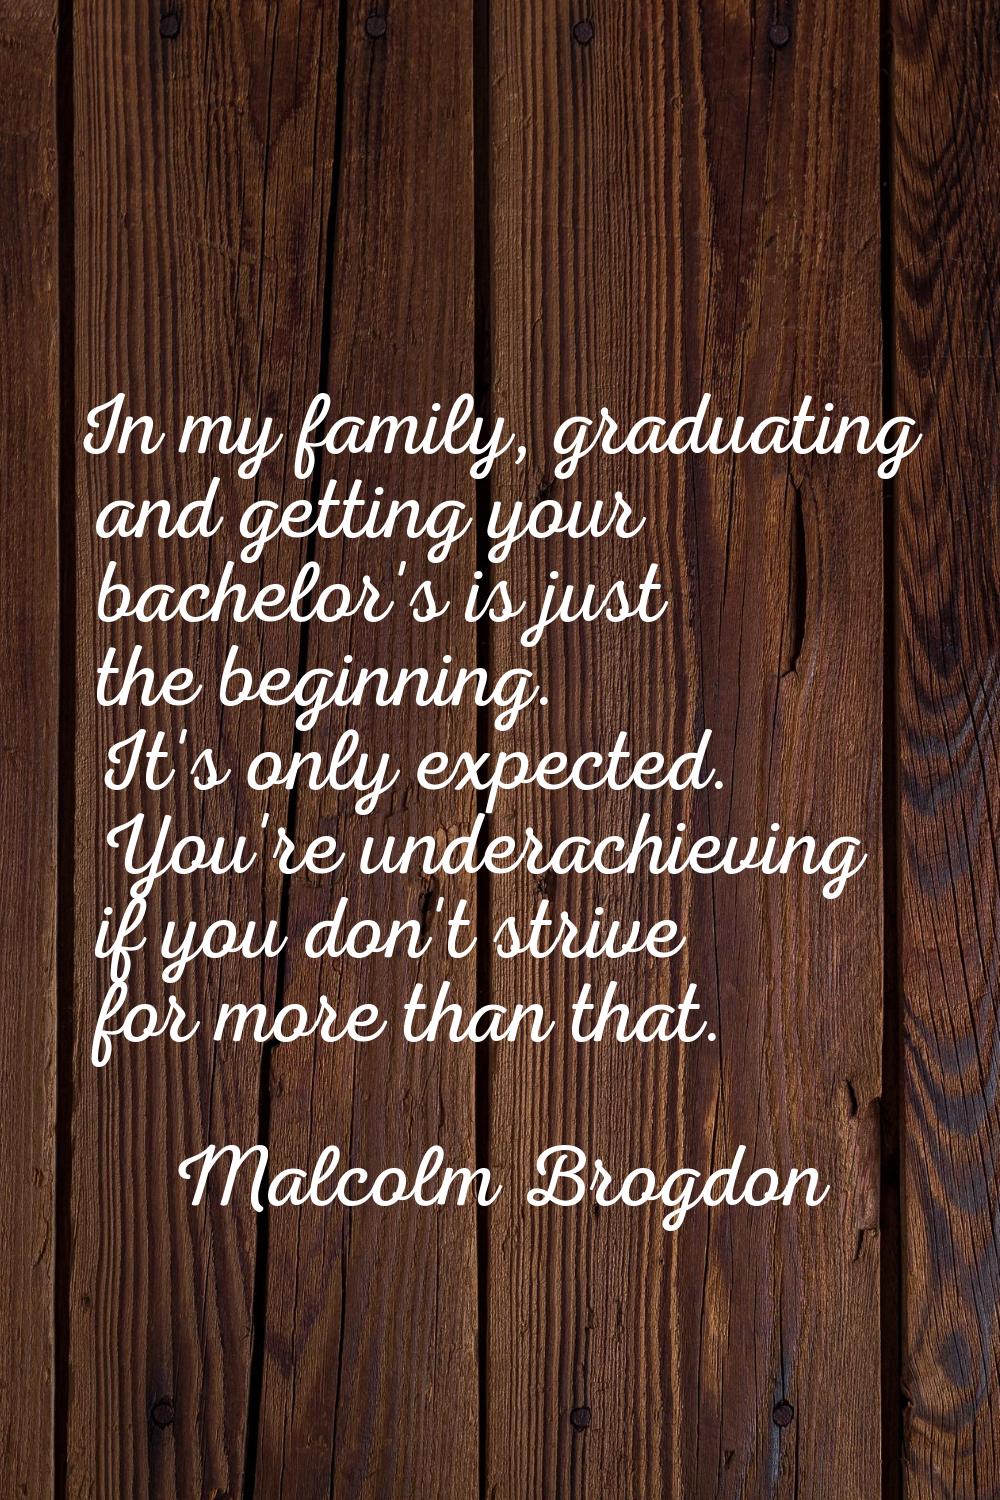 In my family, graduating and getting your bachelor's is just the beginning. It's only expected. You